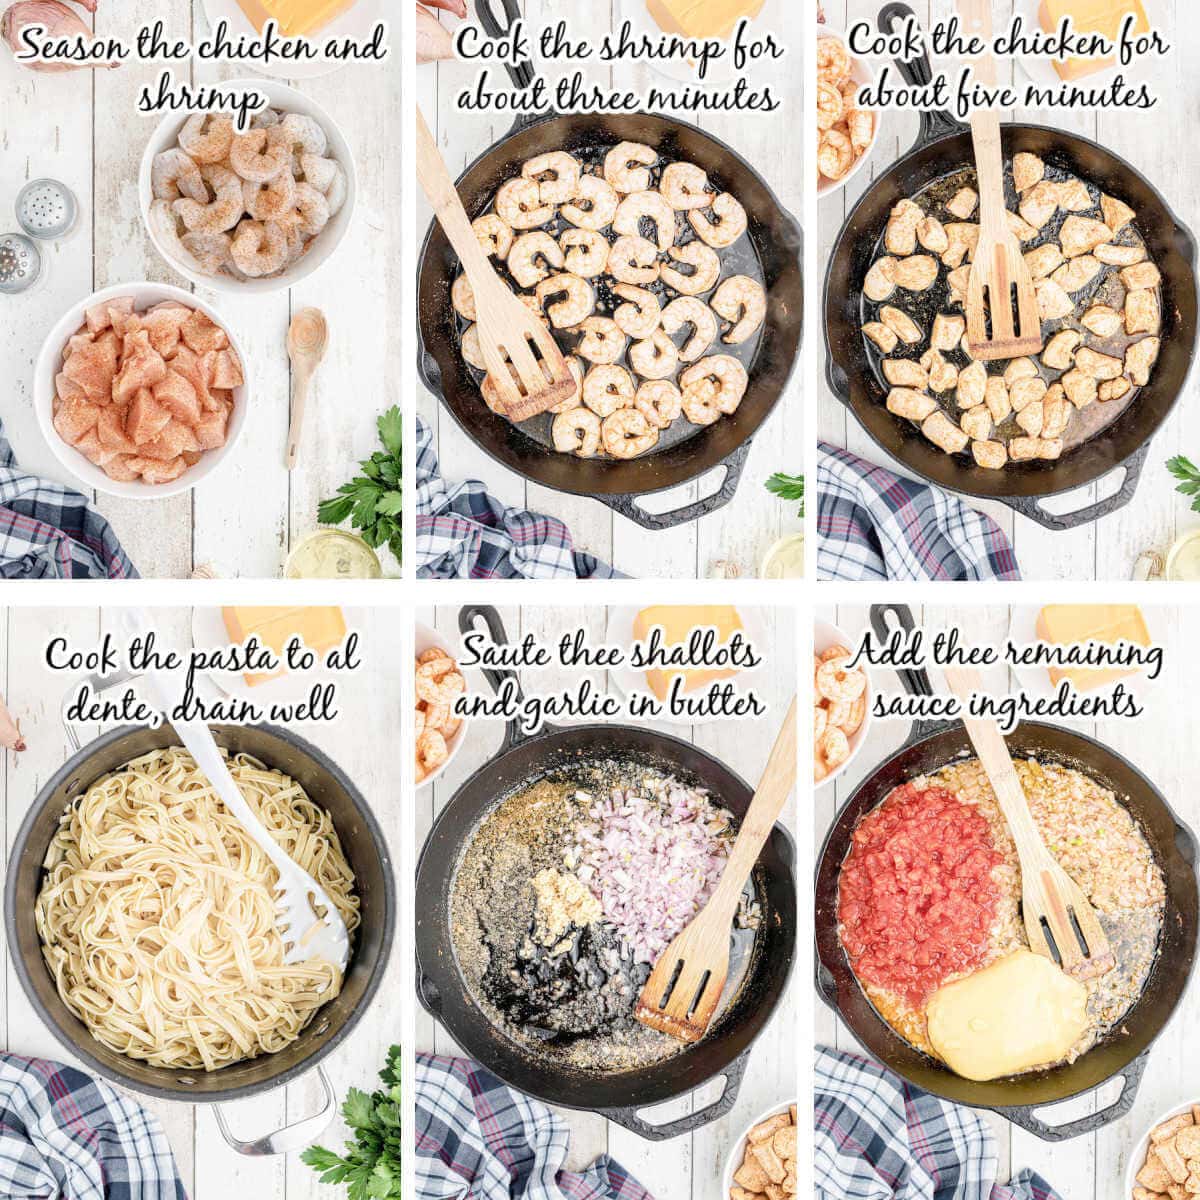 Step-by-step instructions to make the pasta recipe. With print overlay. 